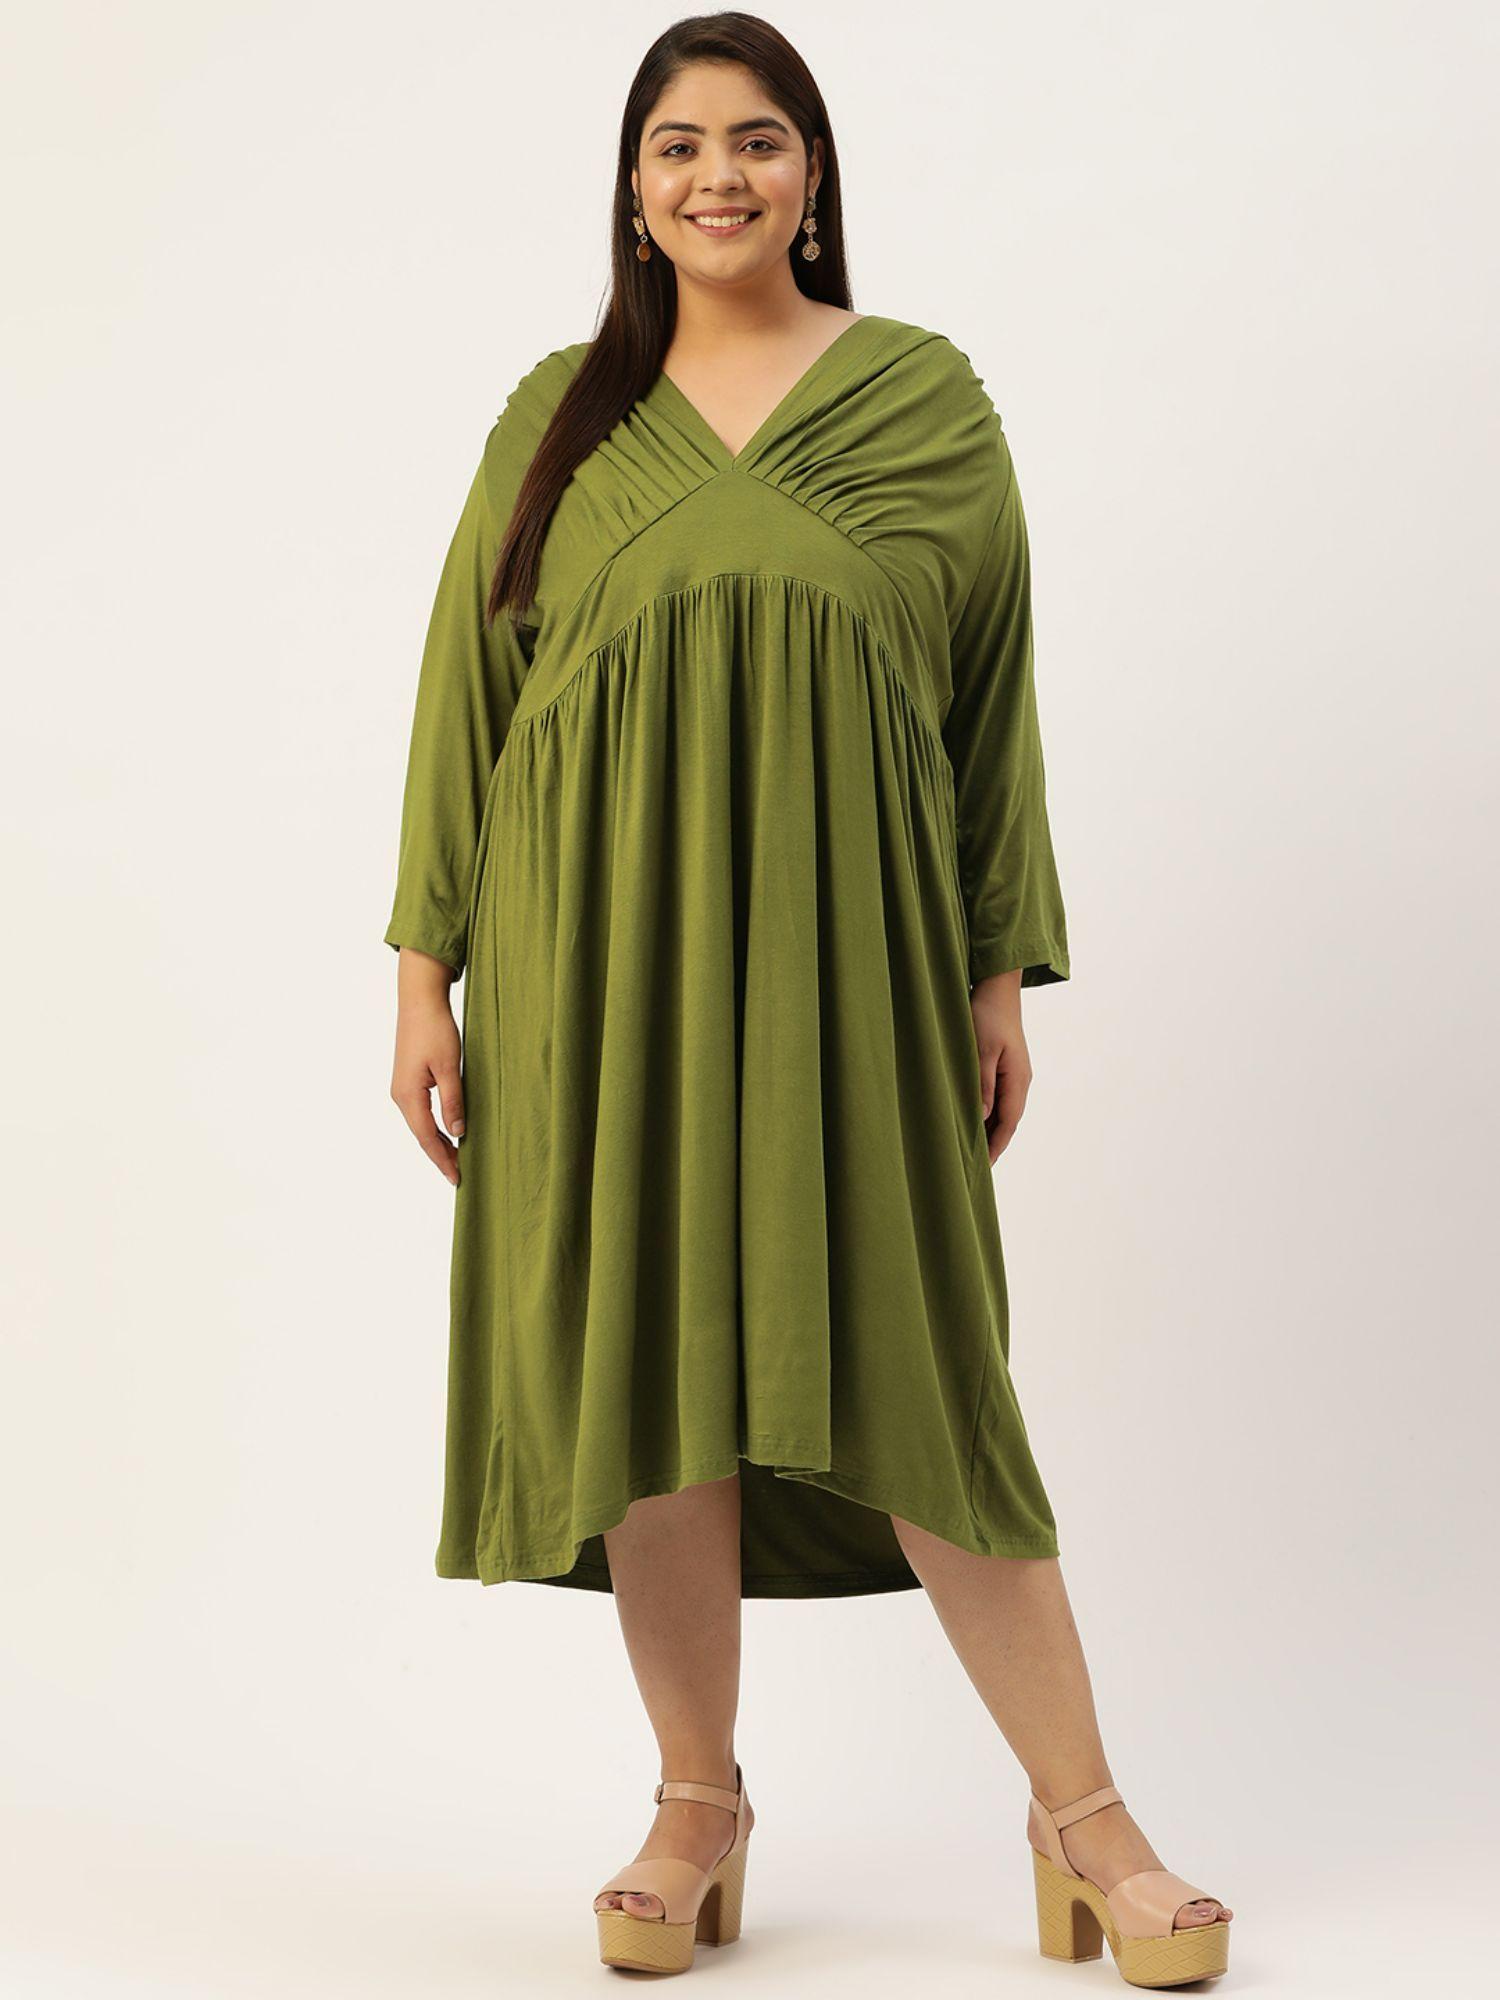 plus-size-women-olive-green-solid-color-viscose-knitted-a-line-dress